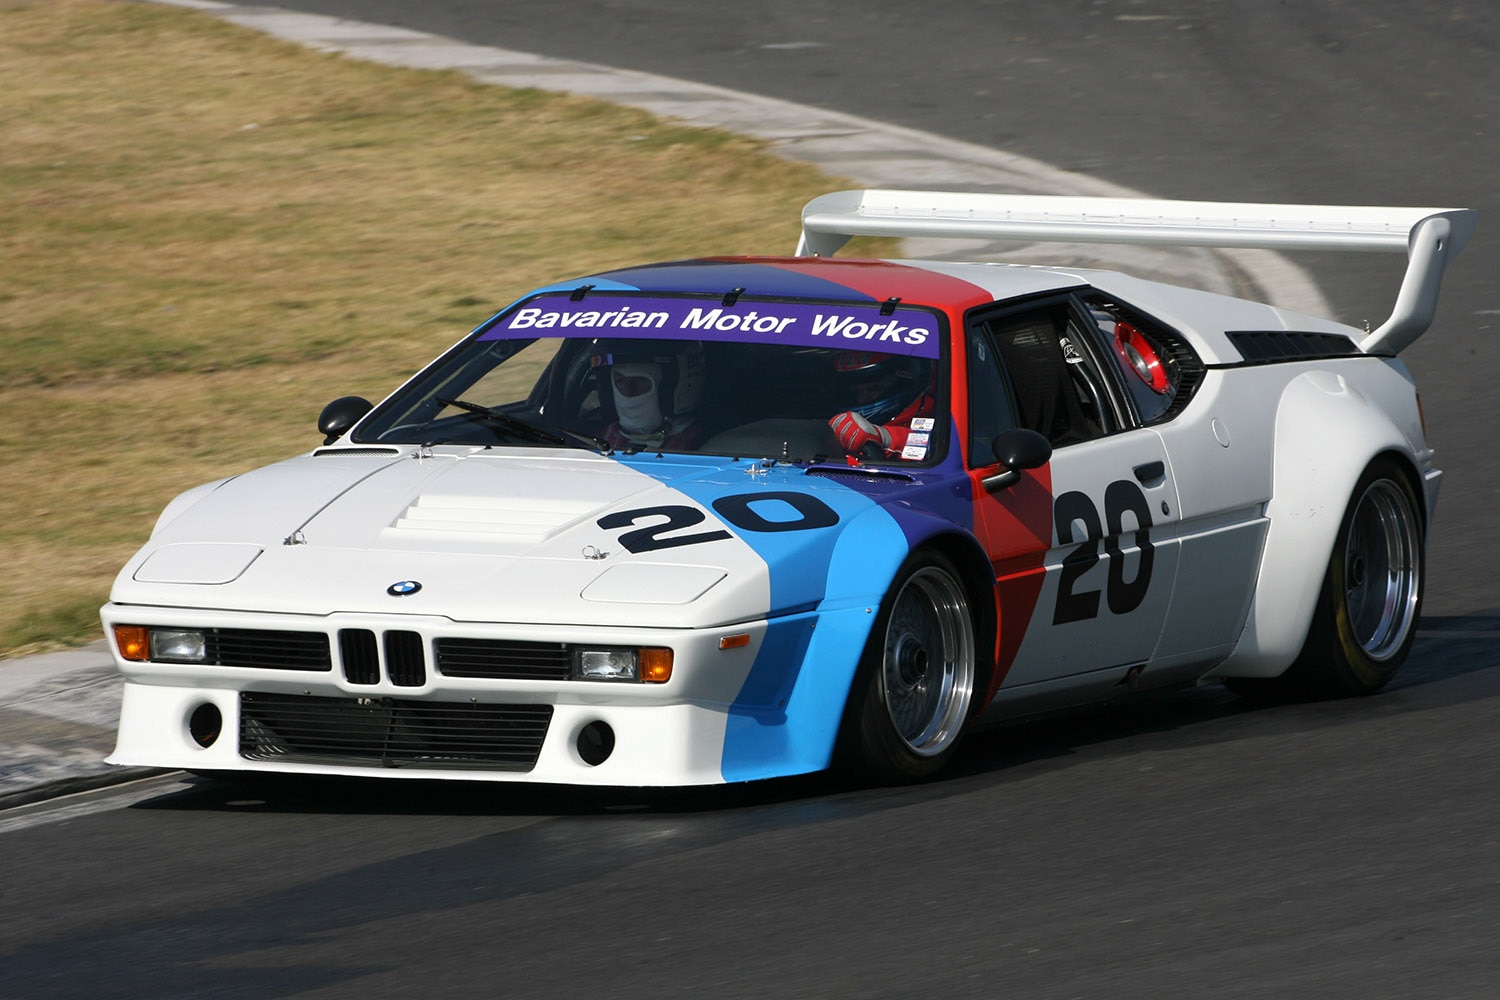 BMW M1 on the racetrack